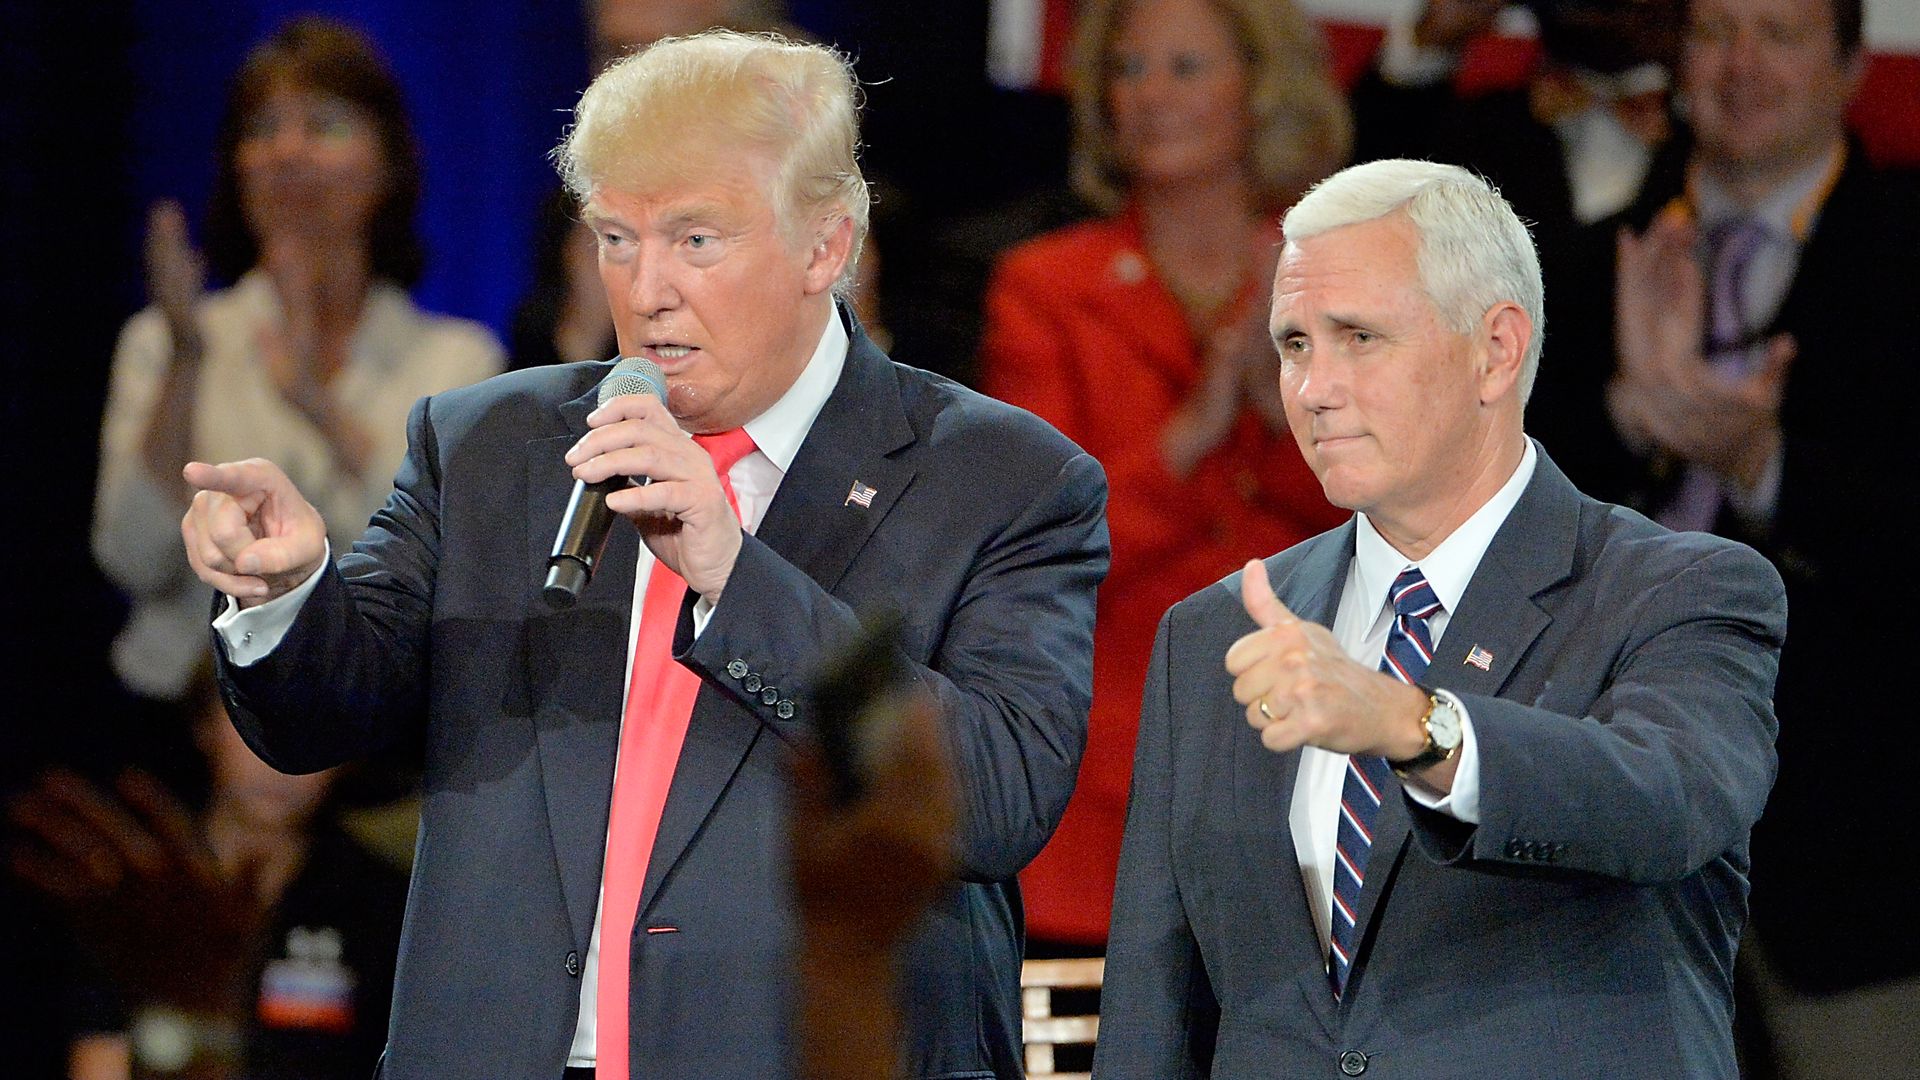 In this image, Trump and Mike Pence stand next to each other in suits.